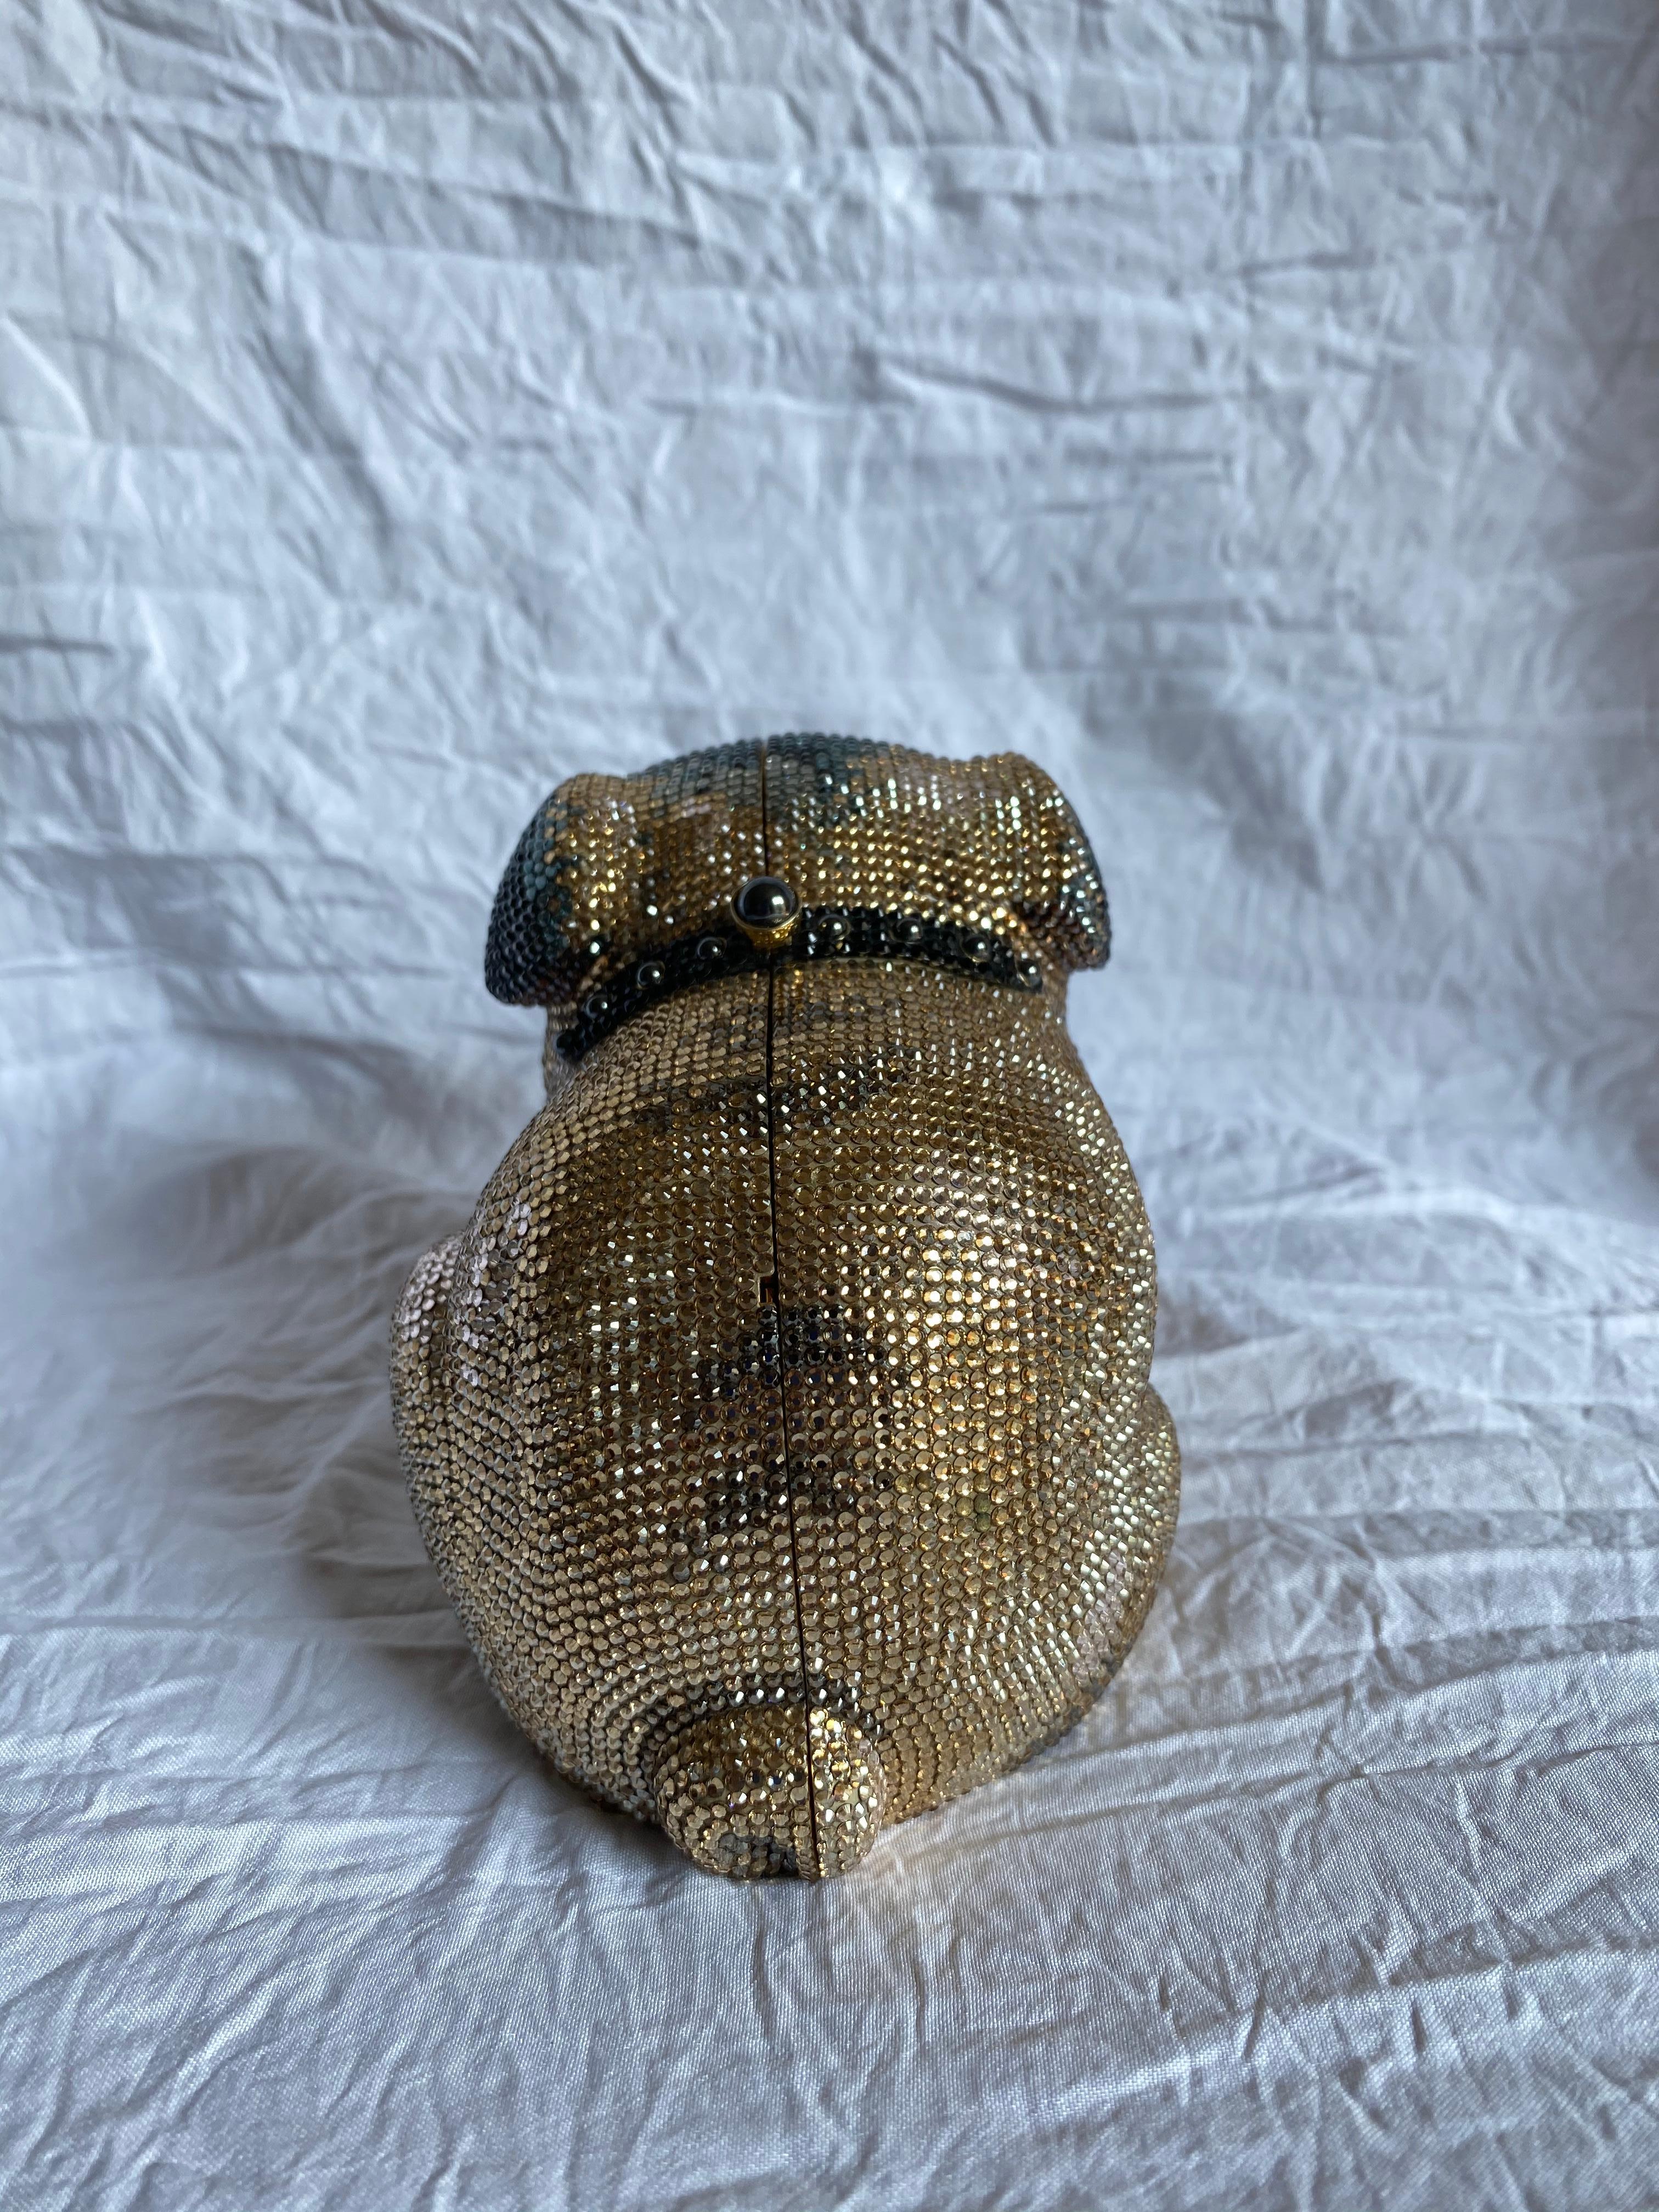 Shades of gold, silver, brown and black swarovski crystals decorate the gold-tone body of this Leiber minaudiere. In the shape of a dog, the bones of this design were inspired by Barbara Bush’s dog Millie. New with tags, originally